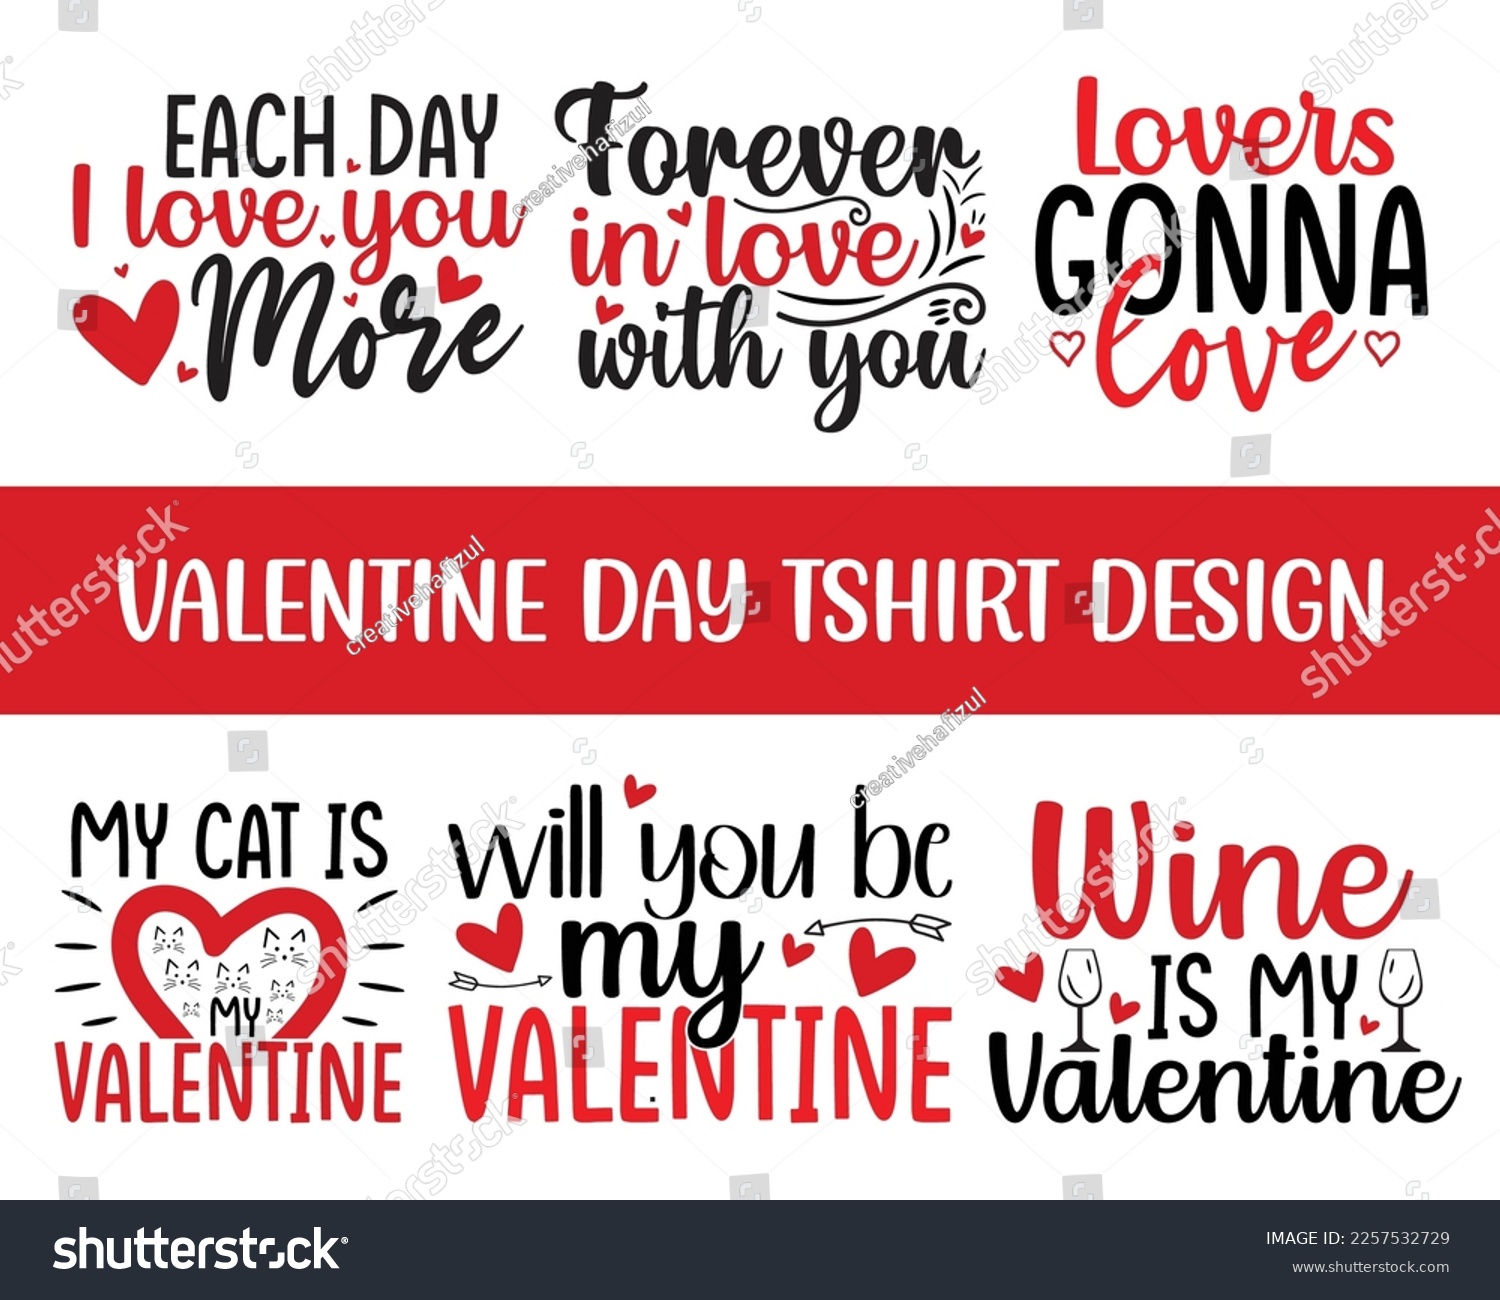 SVG of Valentines day svg t-shirt design bundle. Valentine's day typography t-shirt design quotes. Lovers gonna love, forever in love with you, my cat is my valentine, wine is my valentine svg